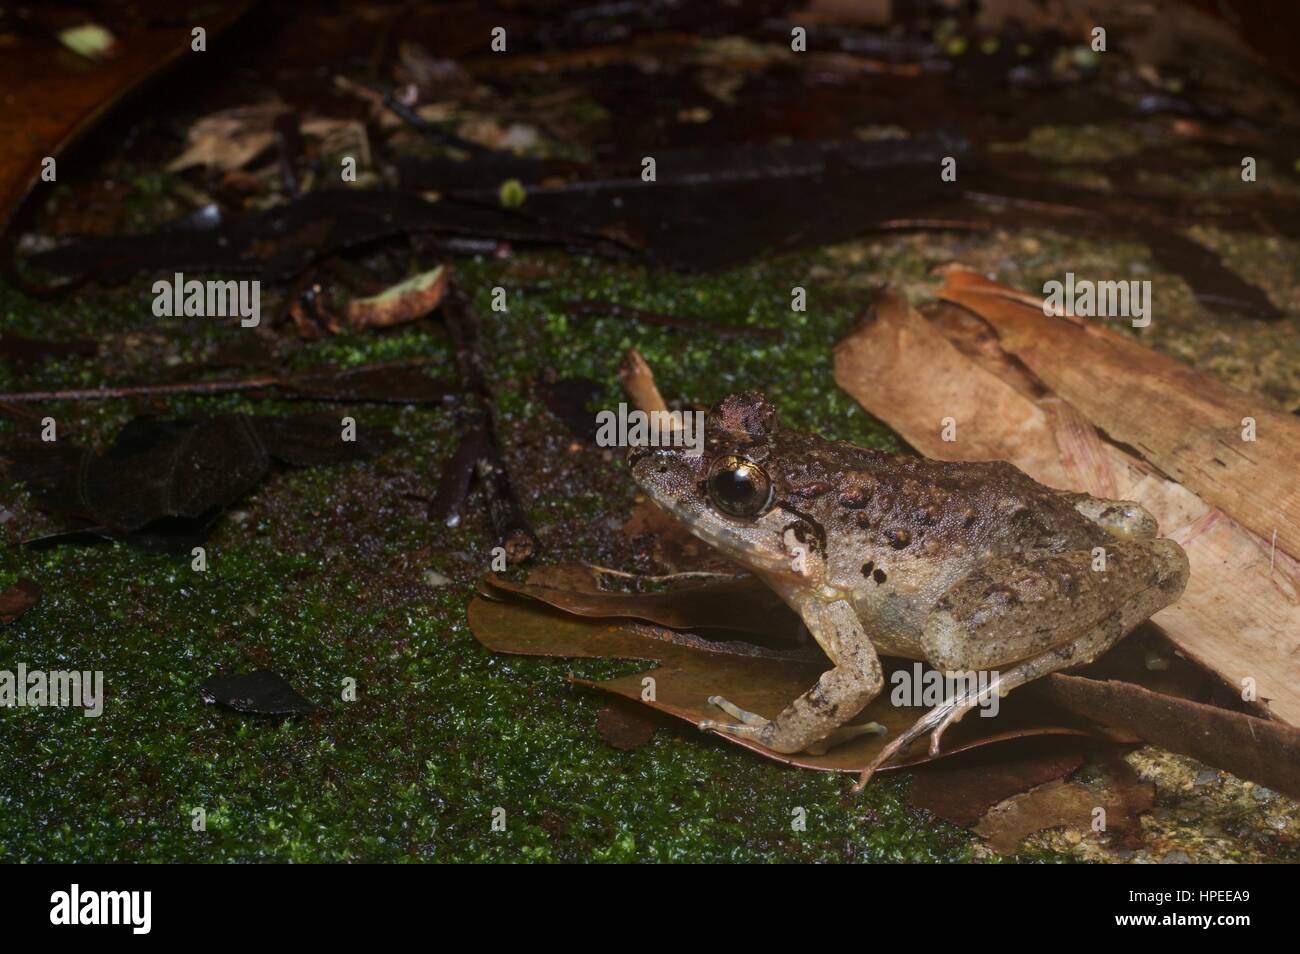 A Malesian Frog (Limnonectes malesianus) in the rainforest at night in Batang Kali, Selangor, Malaysia Stock Photo